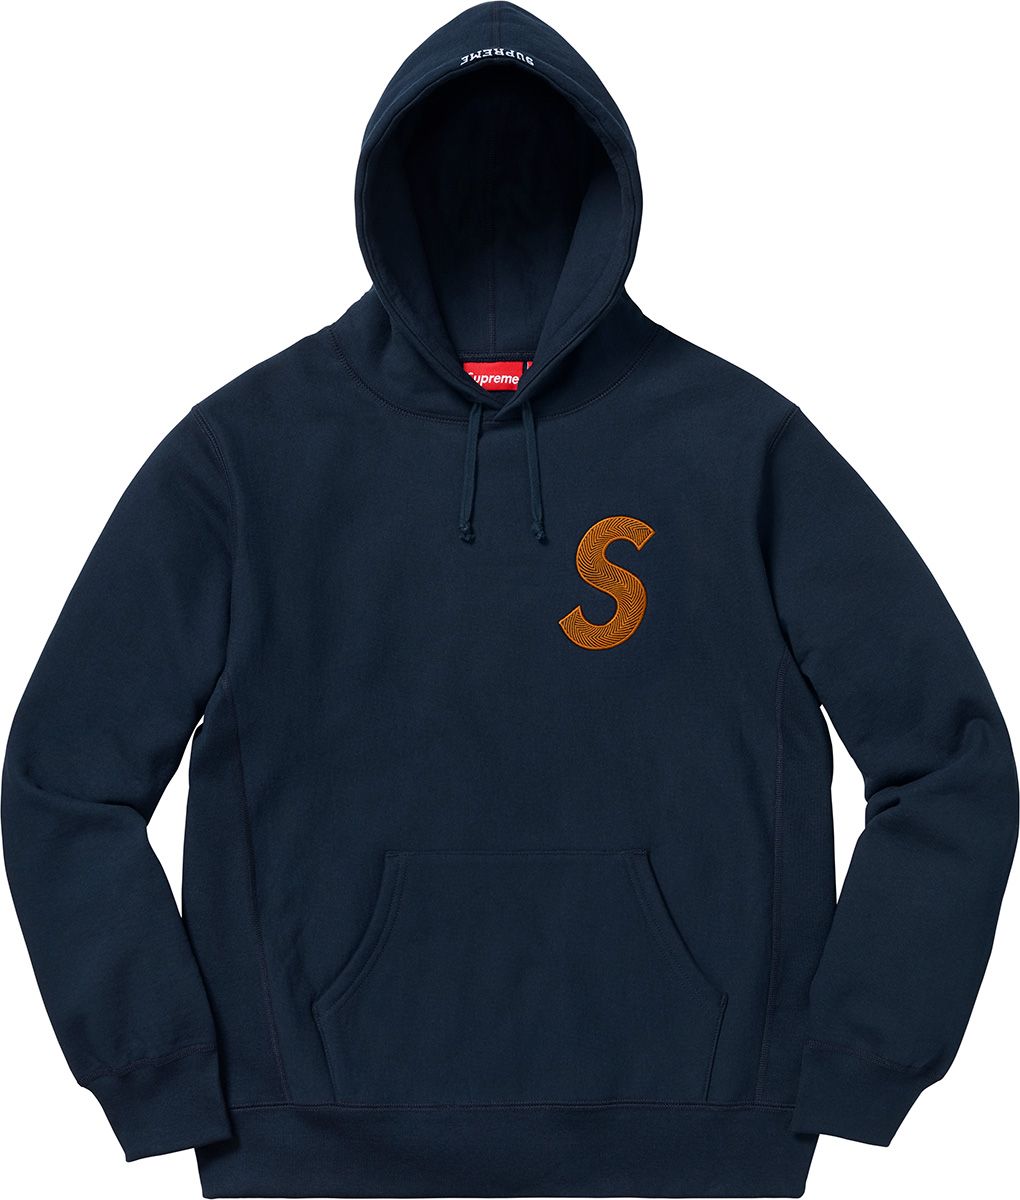 Flowers Hooded Sweatshirt - Fall/Winter 2018 Preview – Supreme